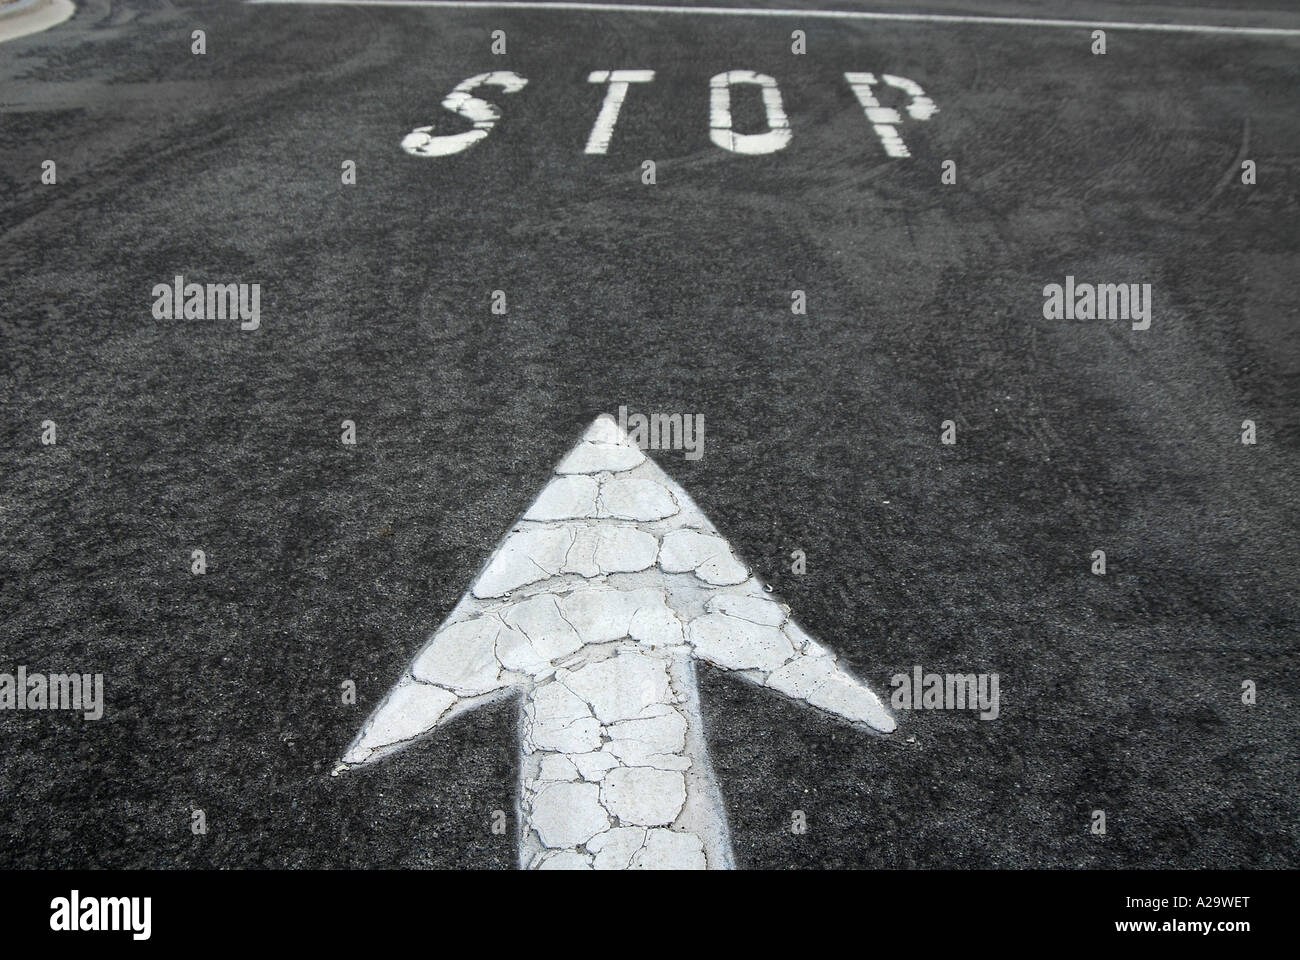 Painted white arrow and stop sign on road. Stock Photo